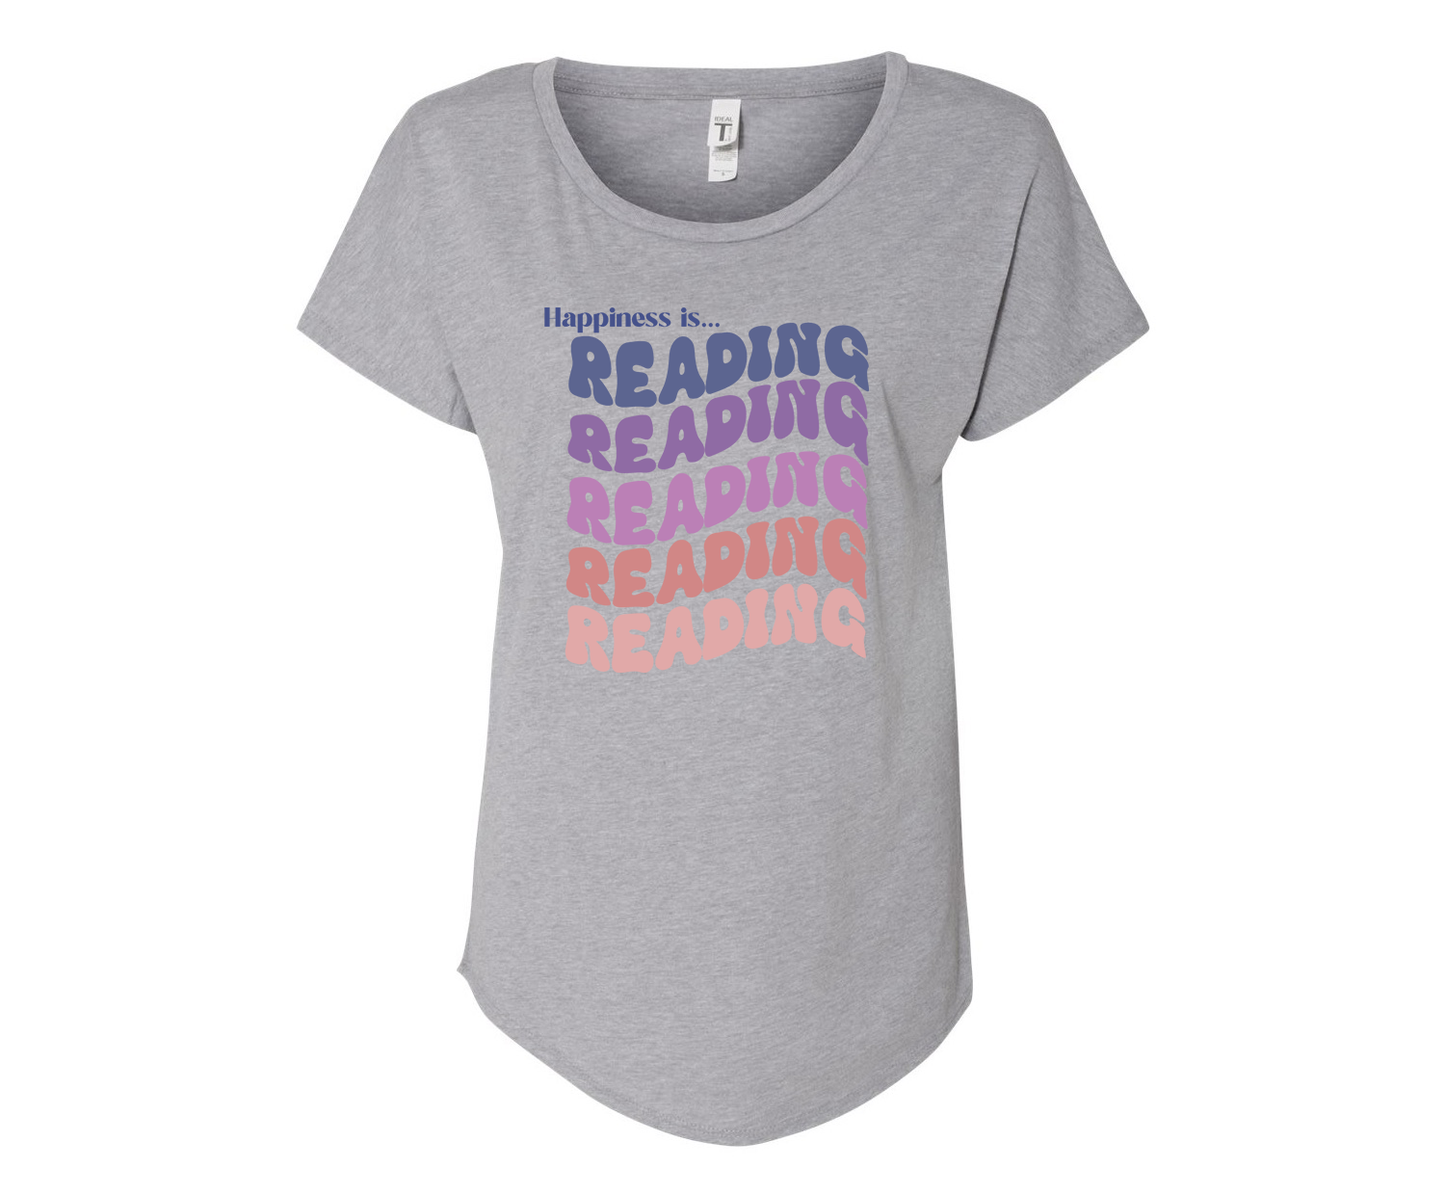 Happiness is Reading Ladies Tee Shirt - In White & Grey